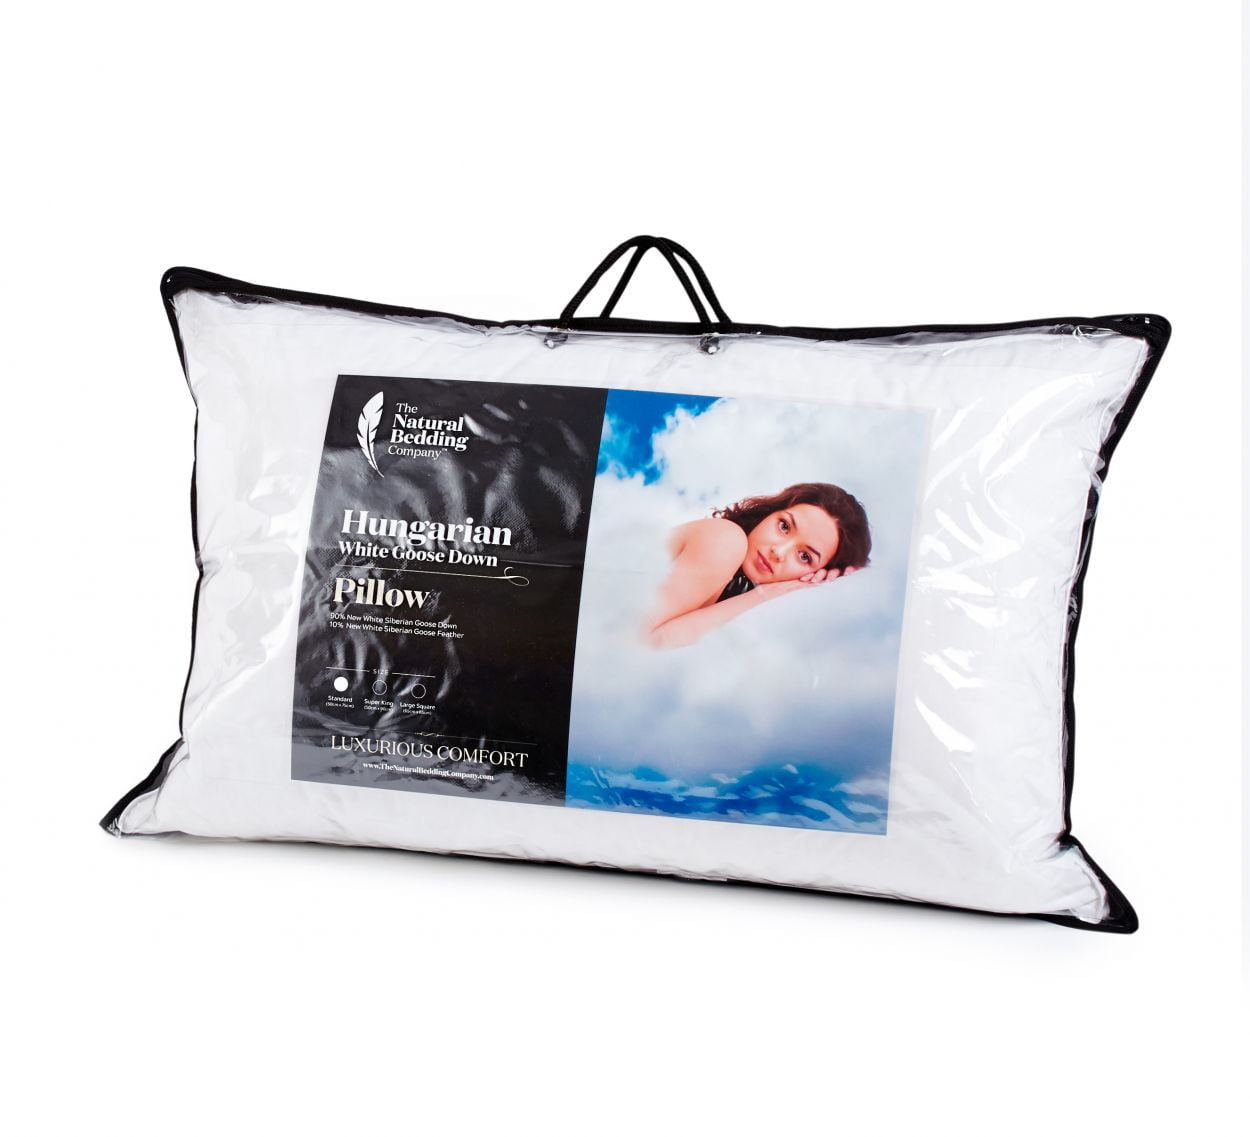 Hungarian White Goose Down Pillow – The 